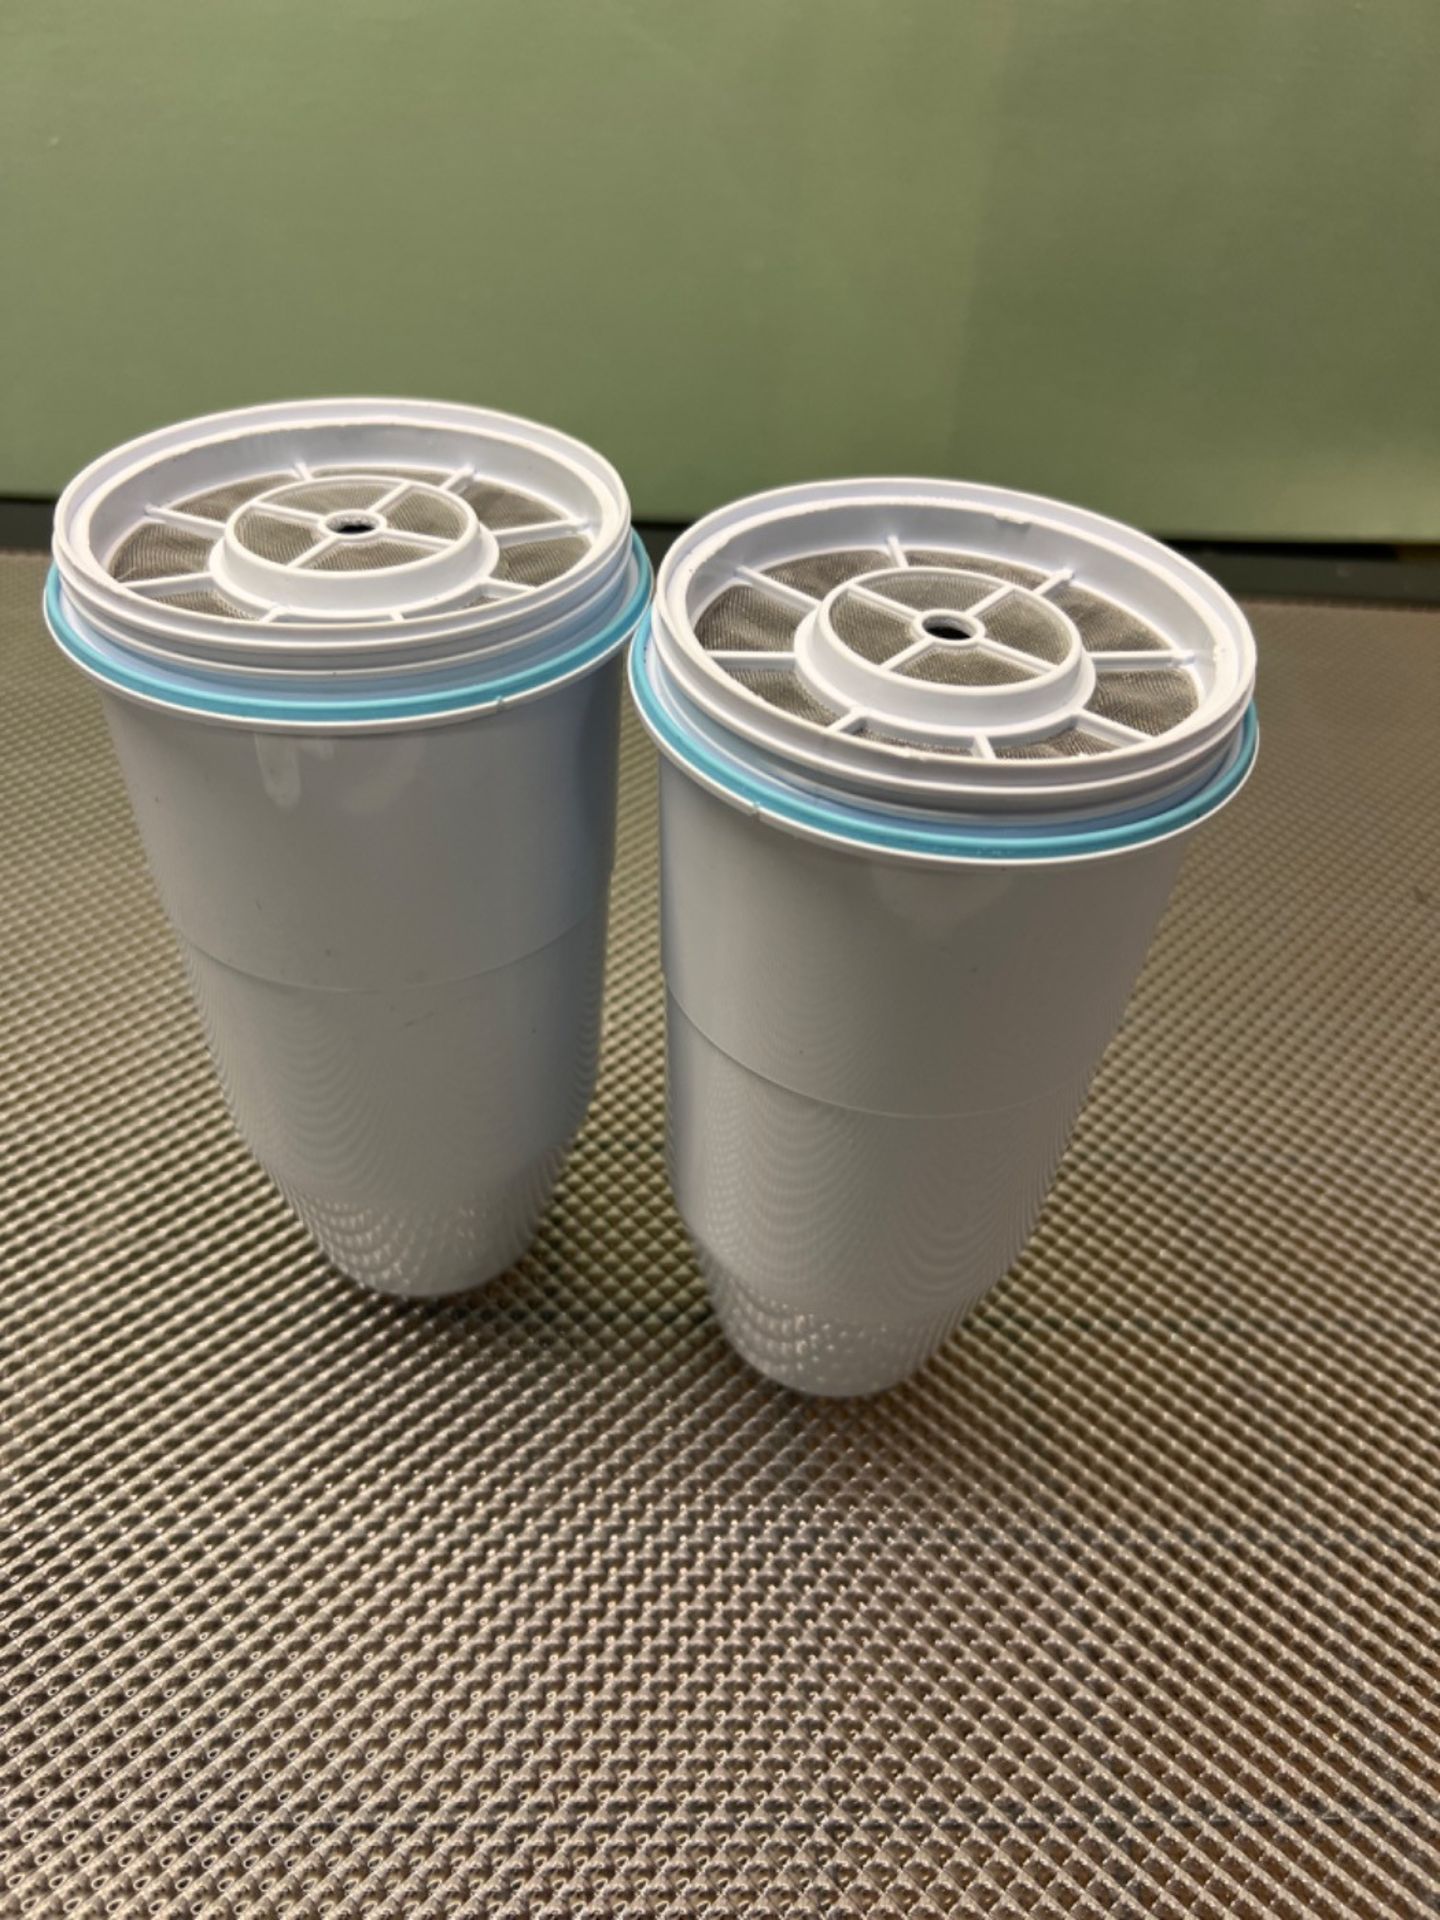 ZeroWater Replacement Water Filter Cartridges, 5 Stage Filtration System Reduces Fluoride, Chlorine - Image 2 of 3